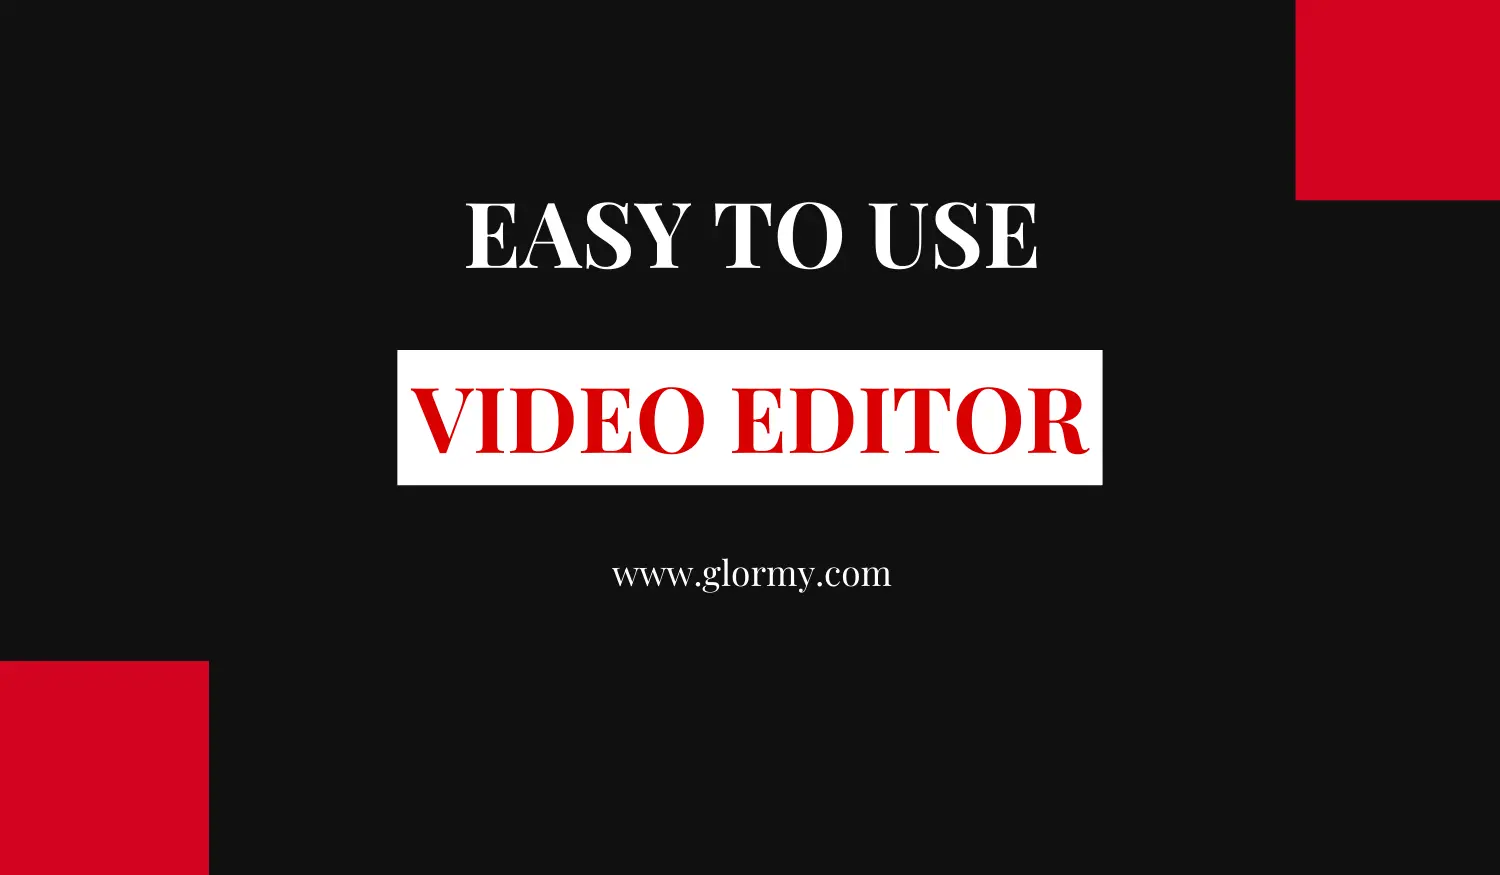 a black background with white text written easy to use video editor and two red boxes